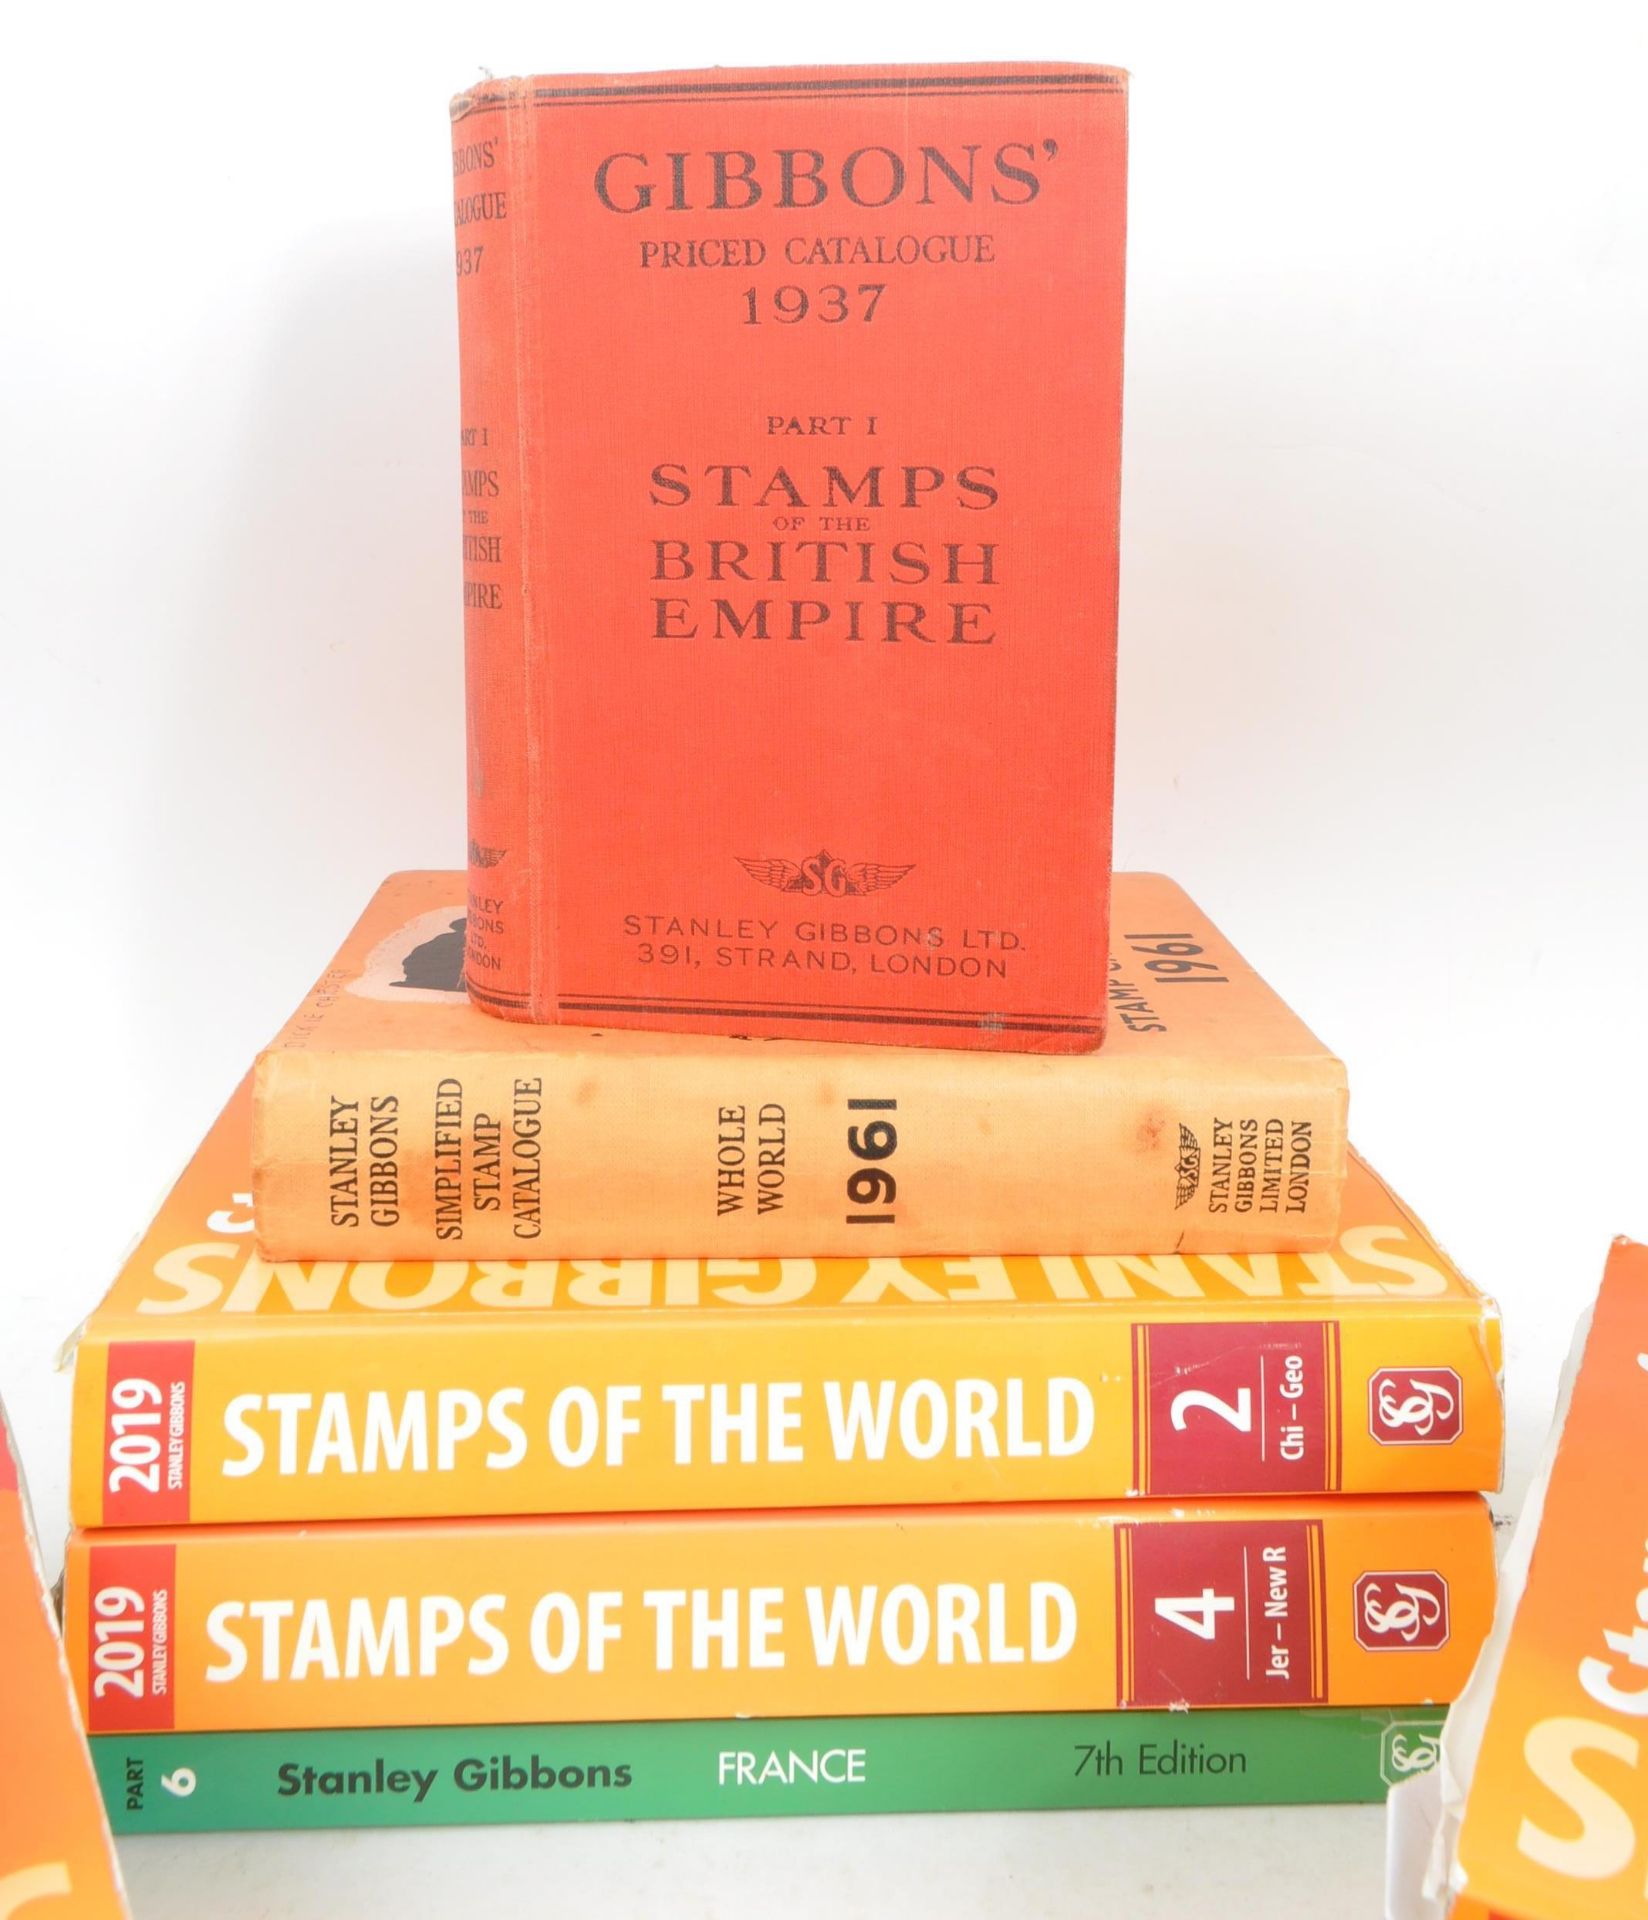 STANLEY GIBBONS - COLLECTION OF STAMP CATALOGUE BOOKS - Bild 2 aus 7